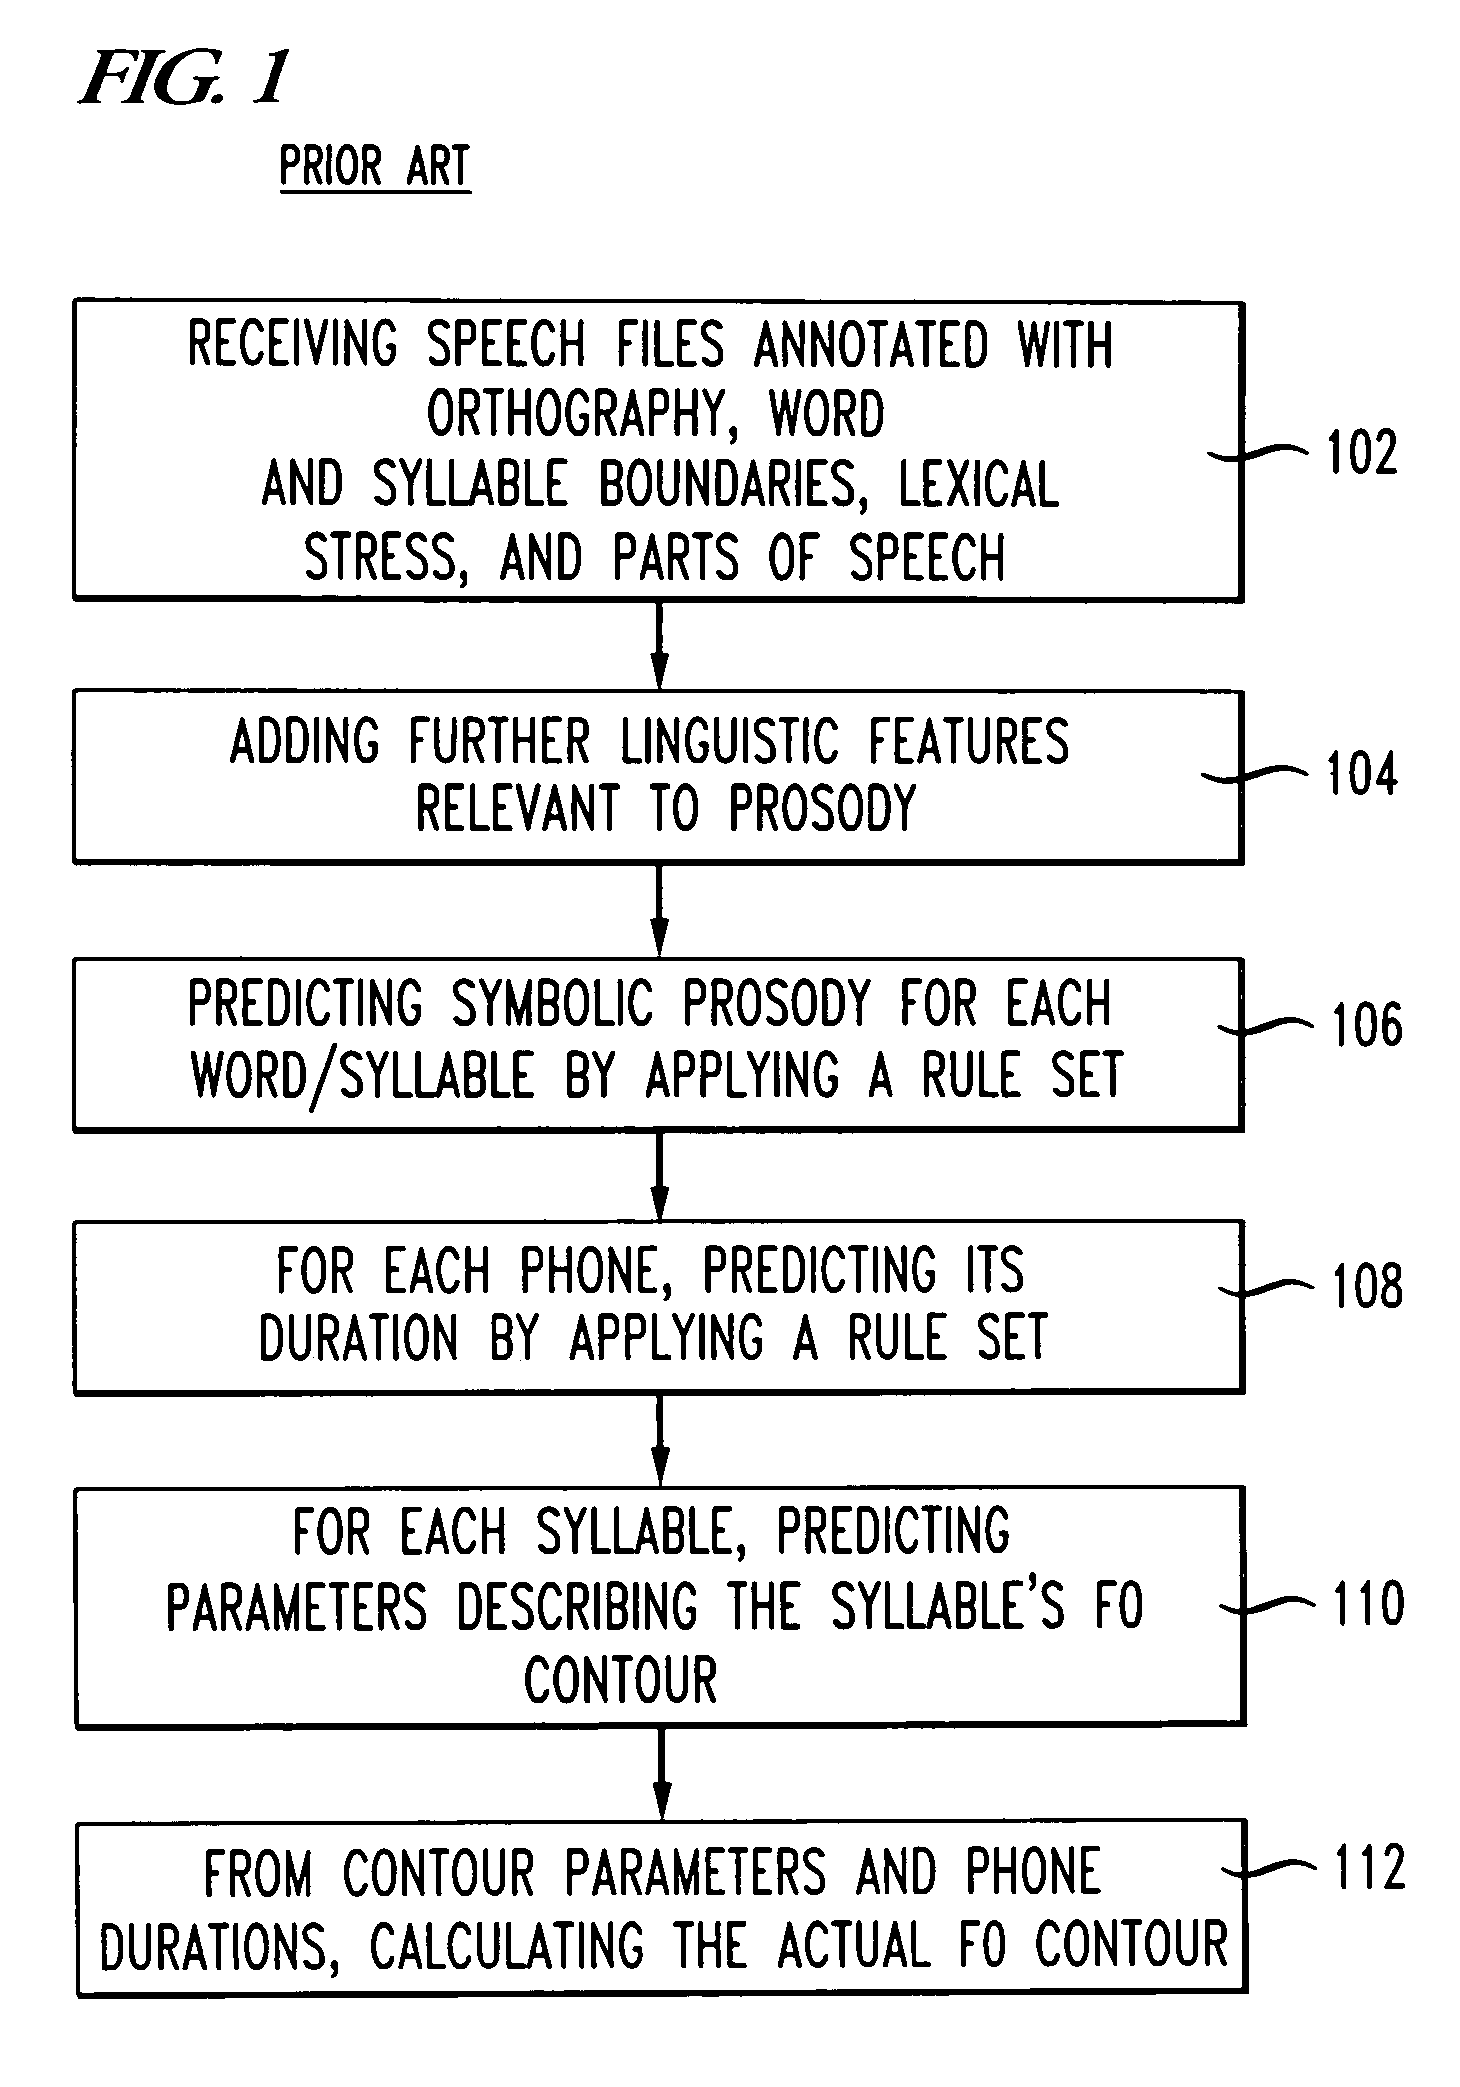 System and method for predicting prosodic parameters